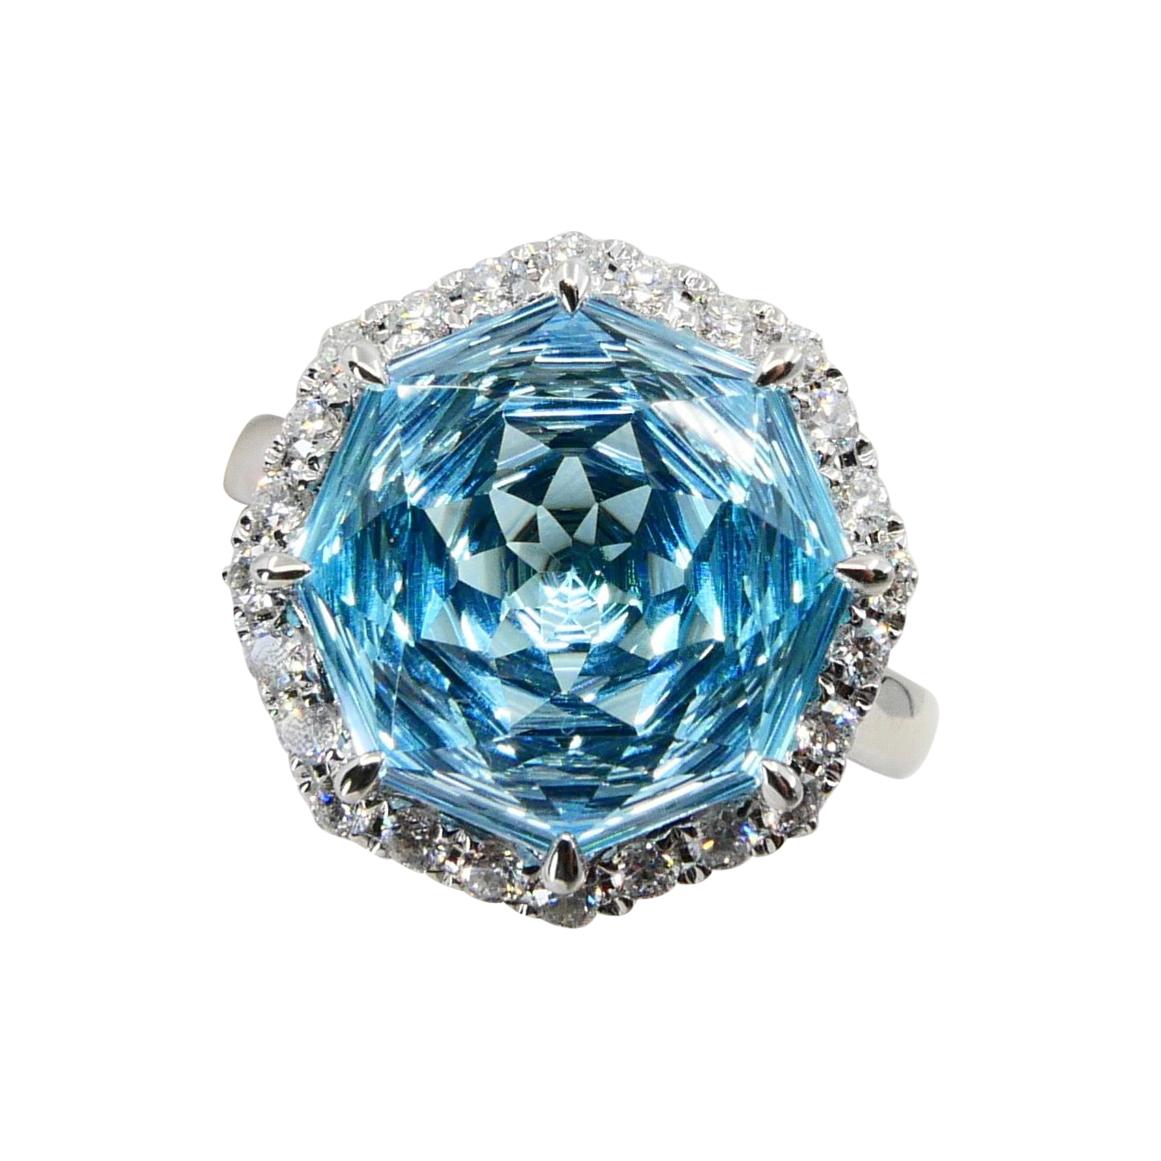 Flower Cut Powder Blue Topaz 7.86 Cts and Diamond Cocktail Ring, Statement Ring